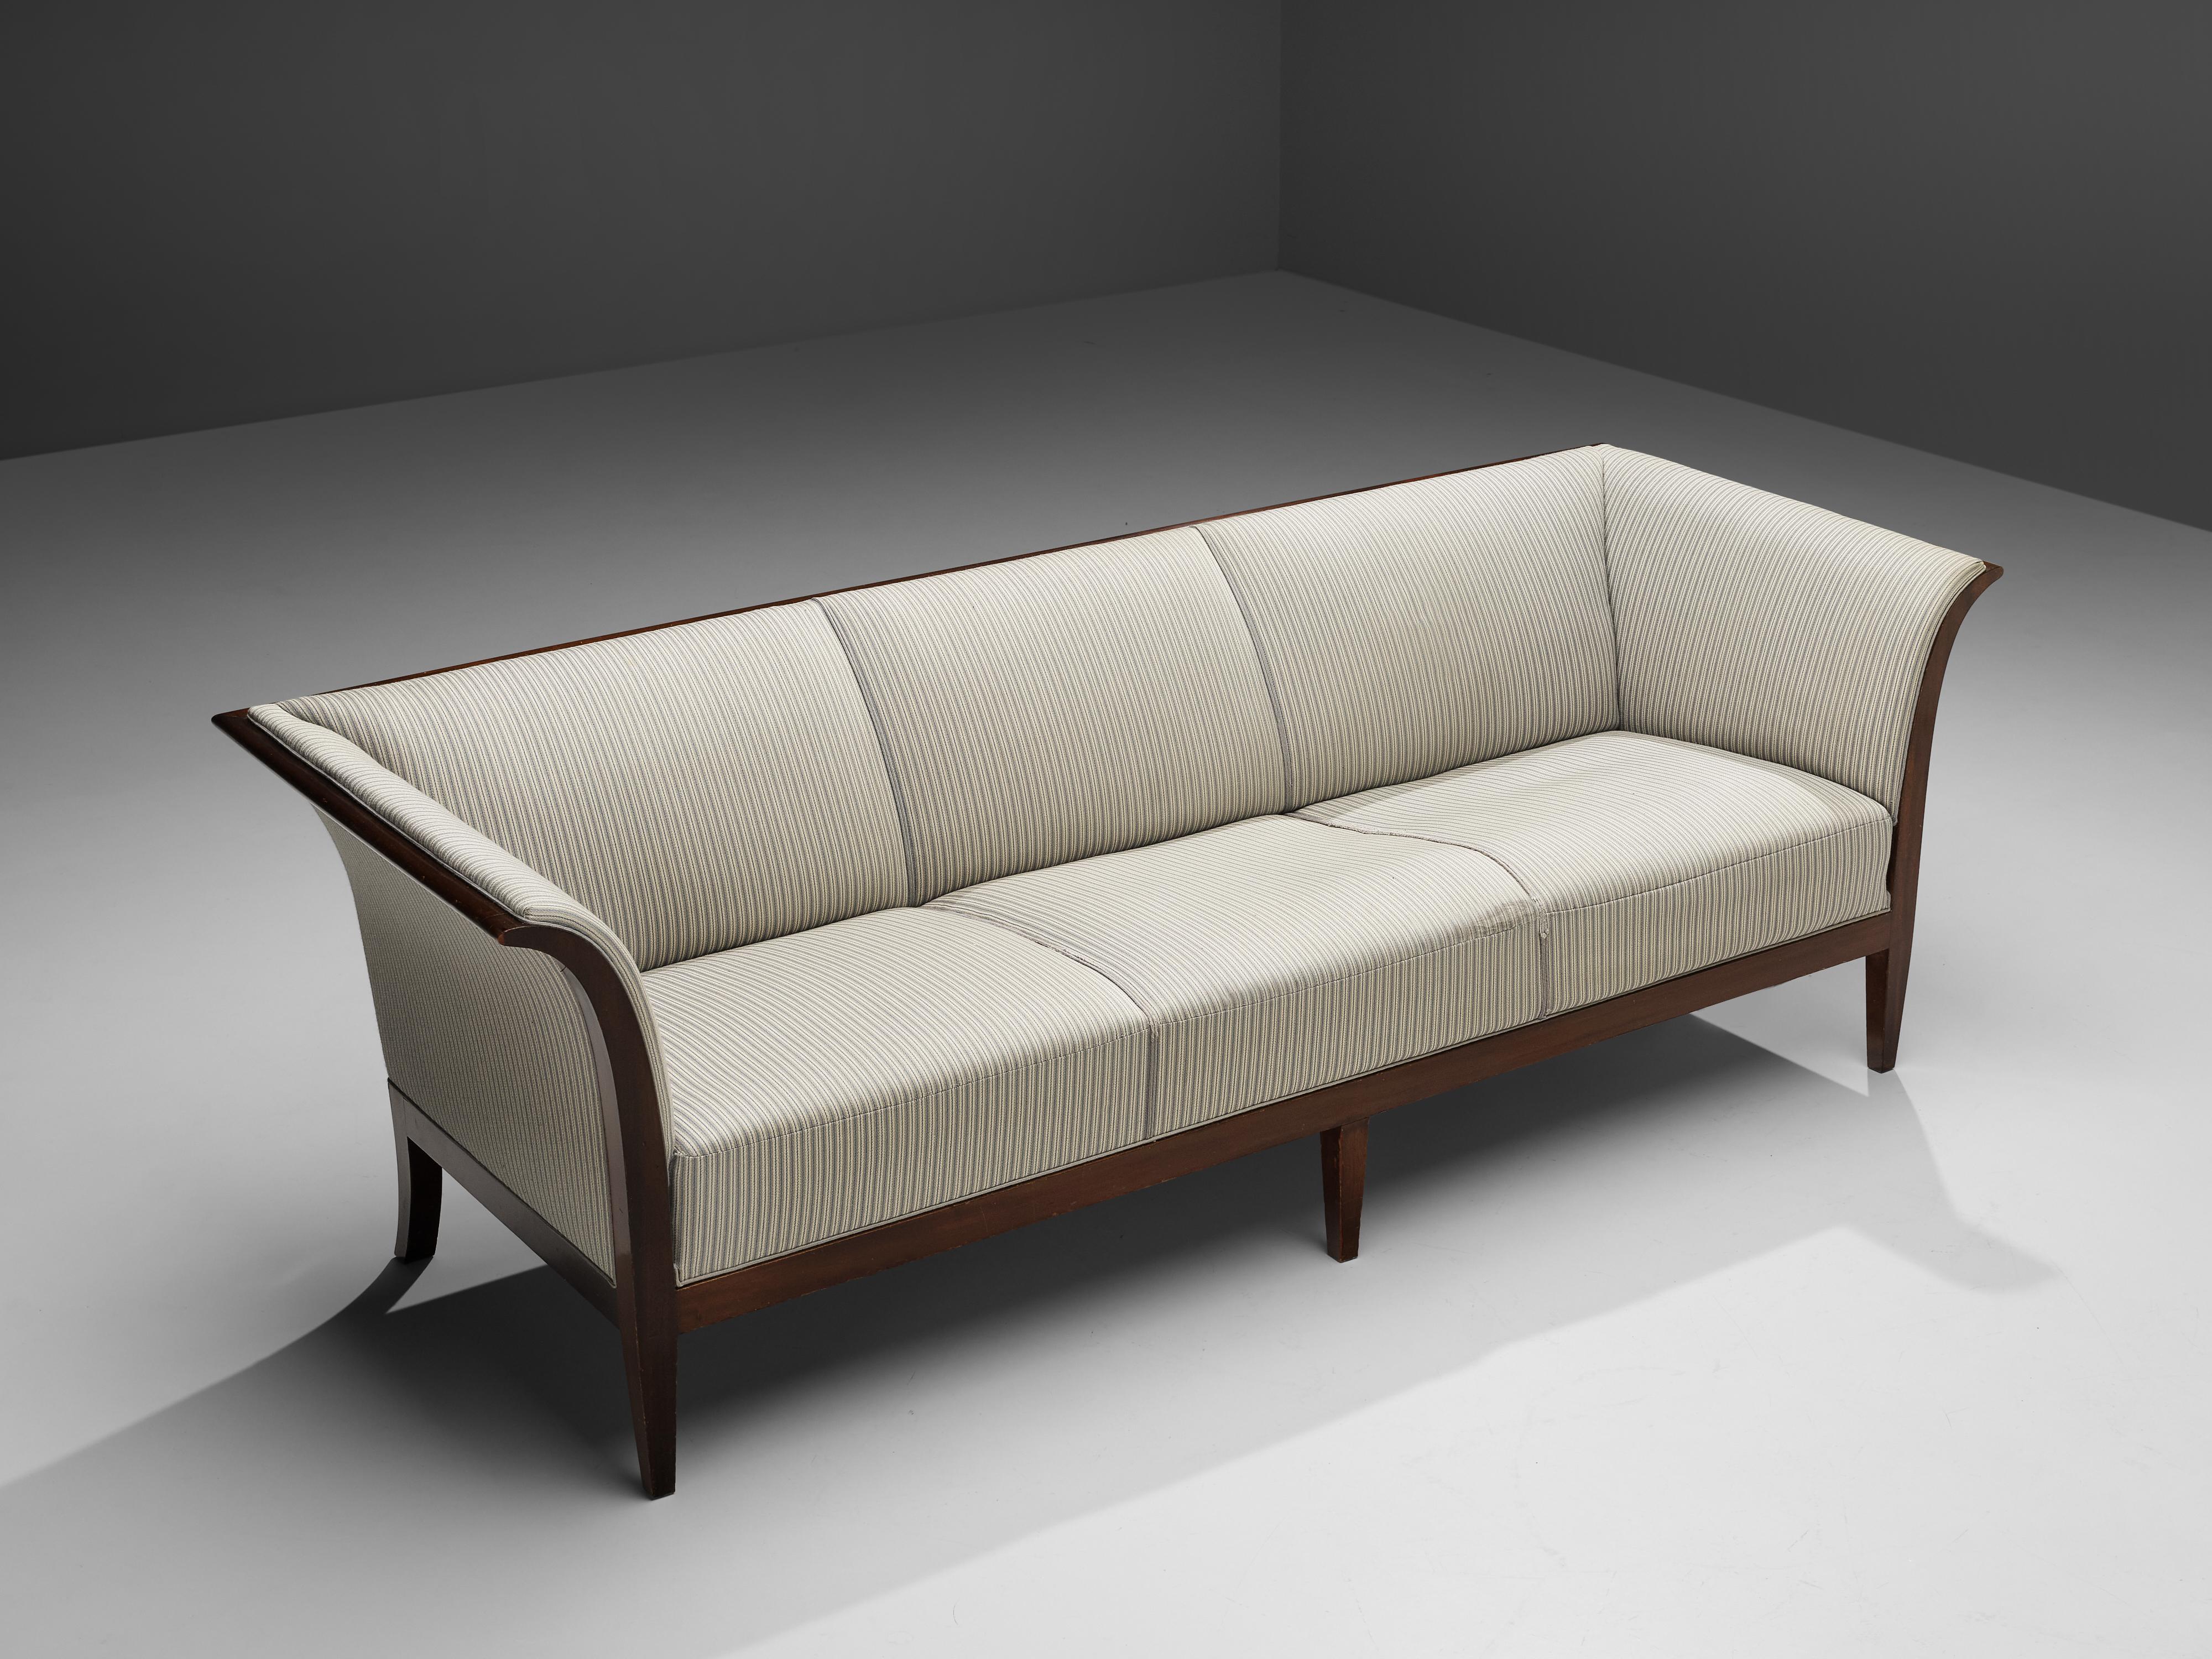 Frits Henningsen, sofa, wood, fabric upholstery, Denmark, 1930s.

This classic sofa was designed and produced by master cabinetmaker Frits Henningsen in the 1930s. The design is well-balanced, showing an interesting contrast between the straight